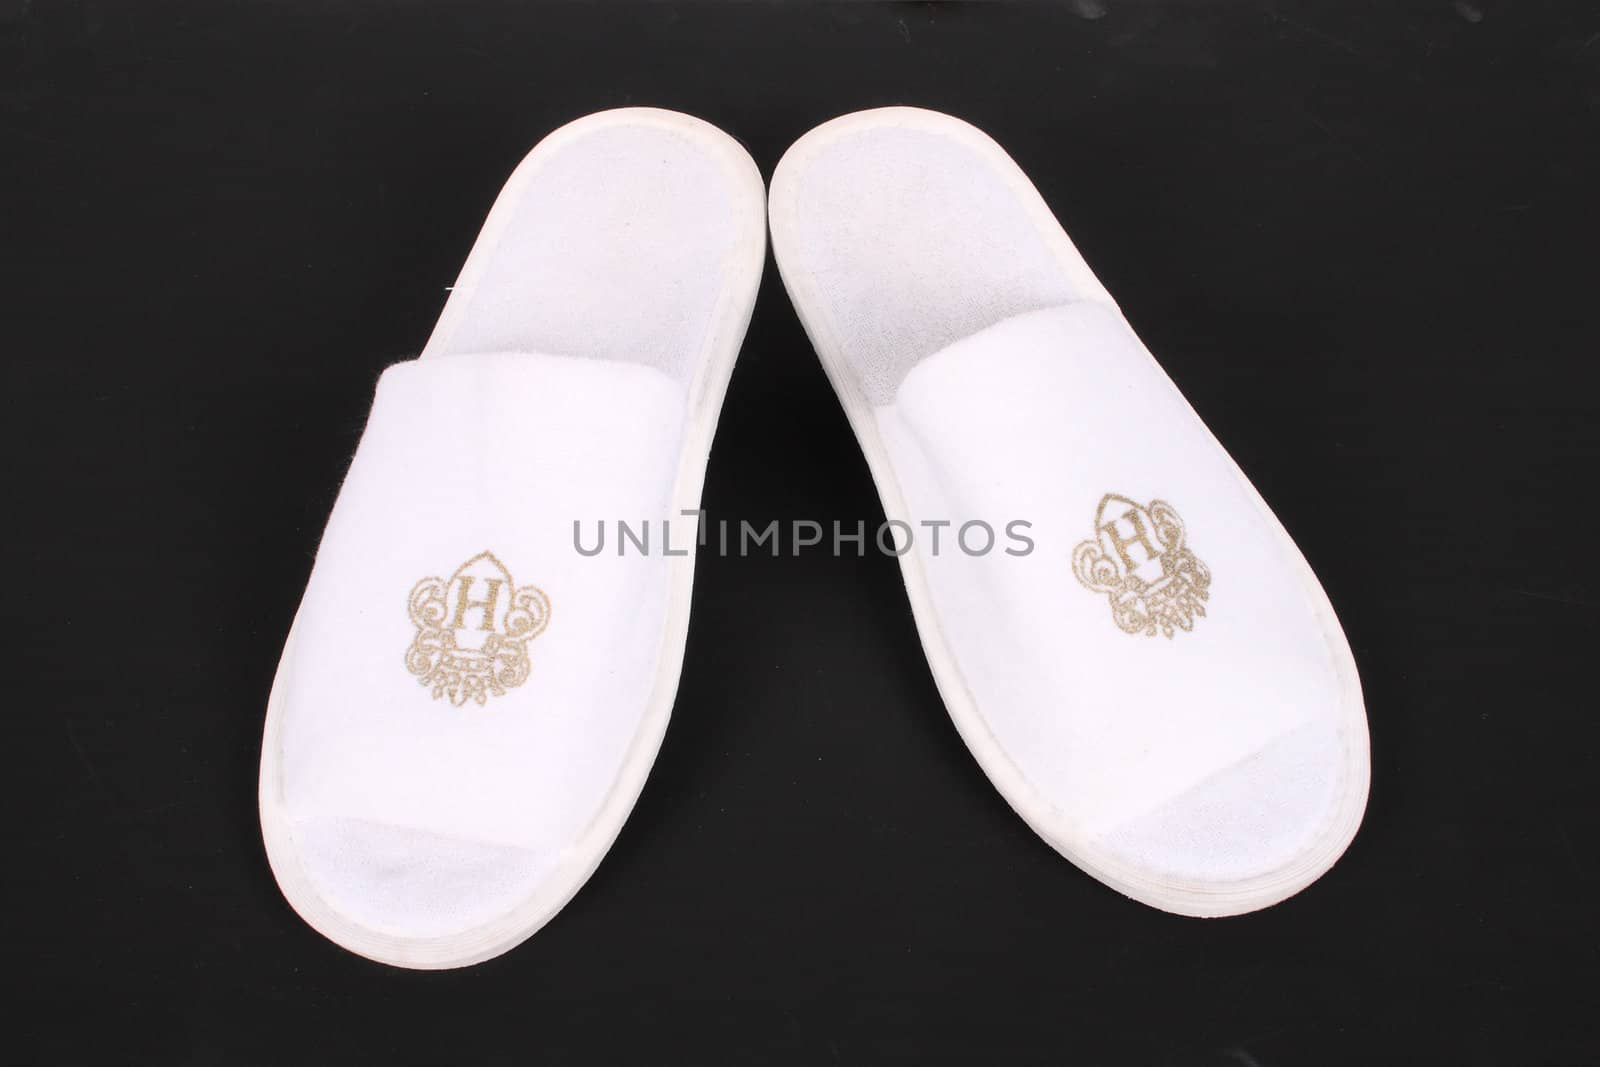 pair white hotel slippers isolated over black